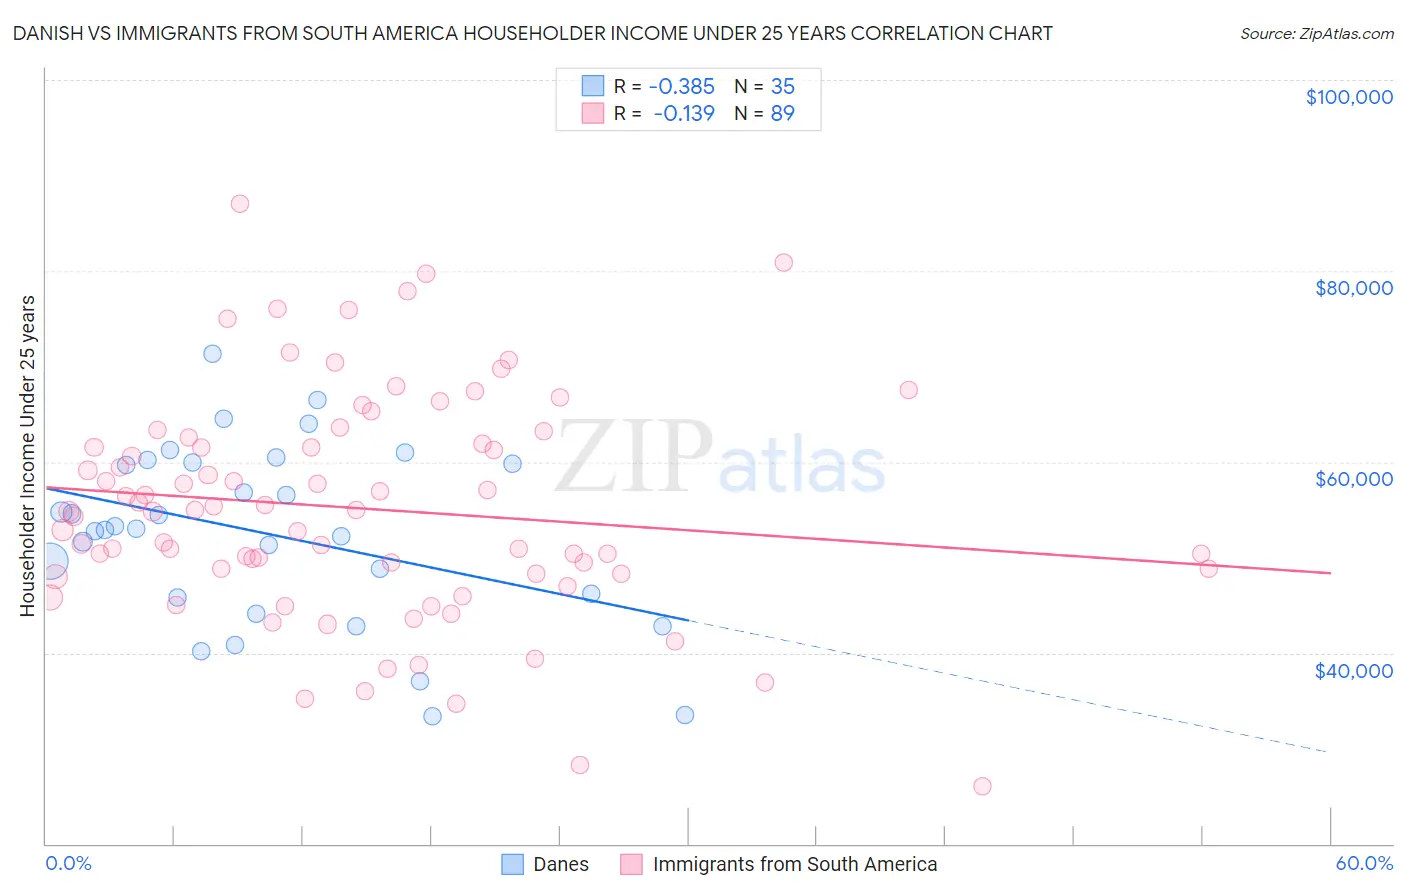 Danish vs Immigrants from South America Householder Income Under 25 years